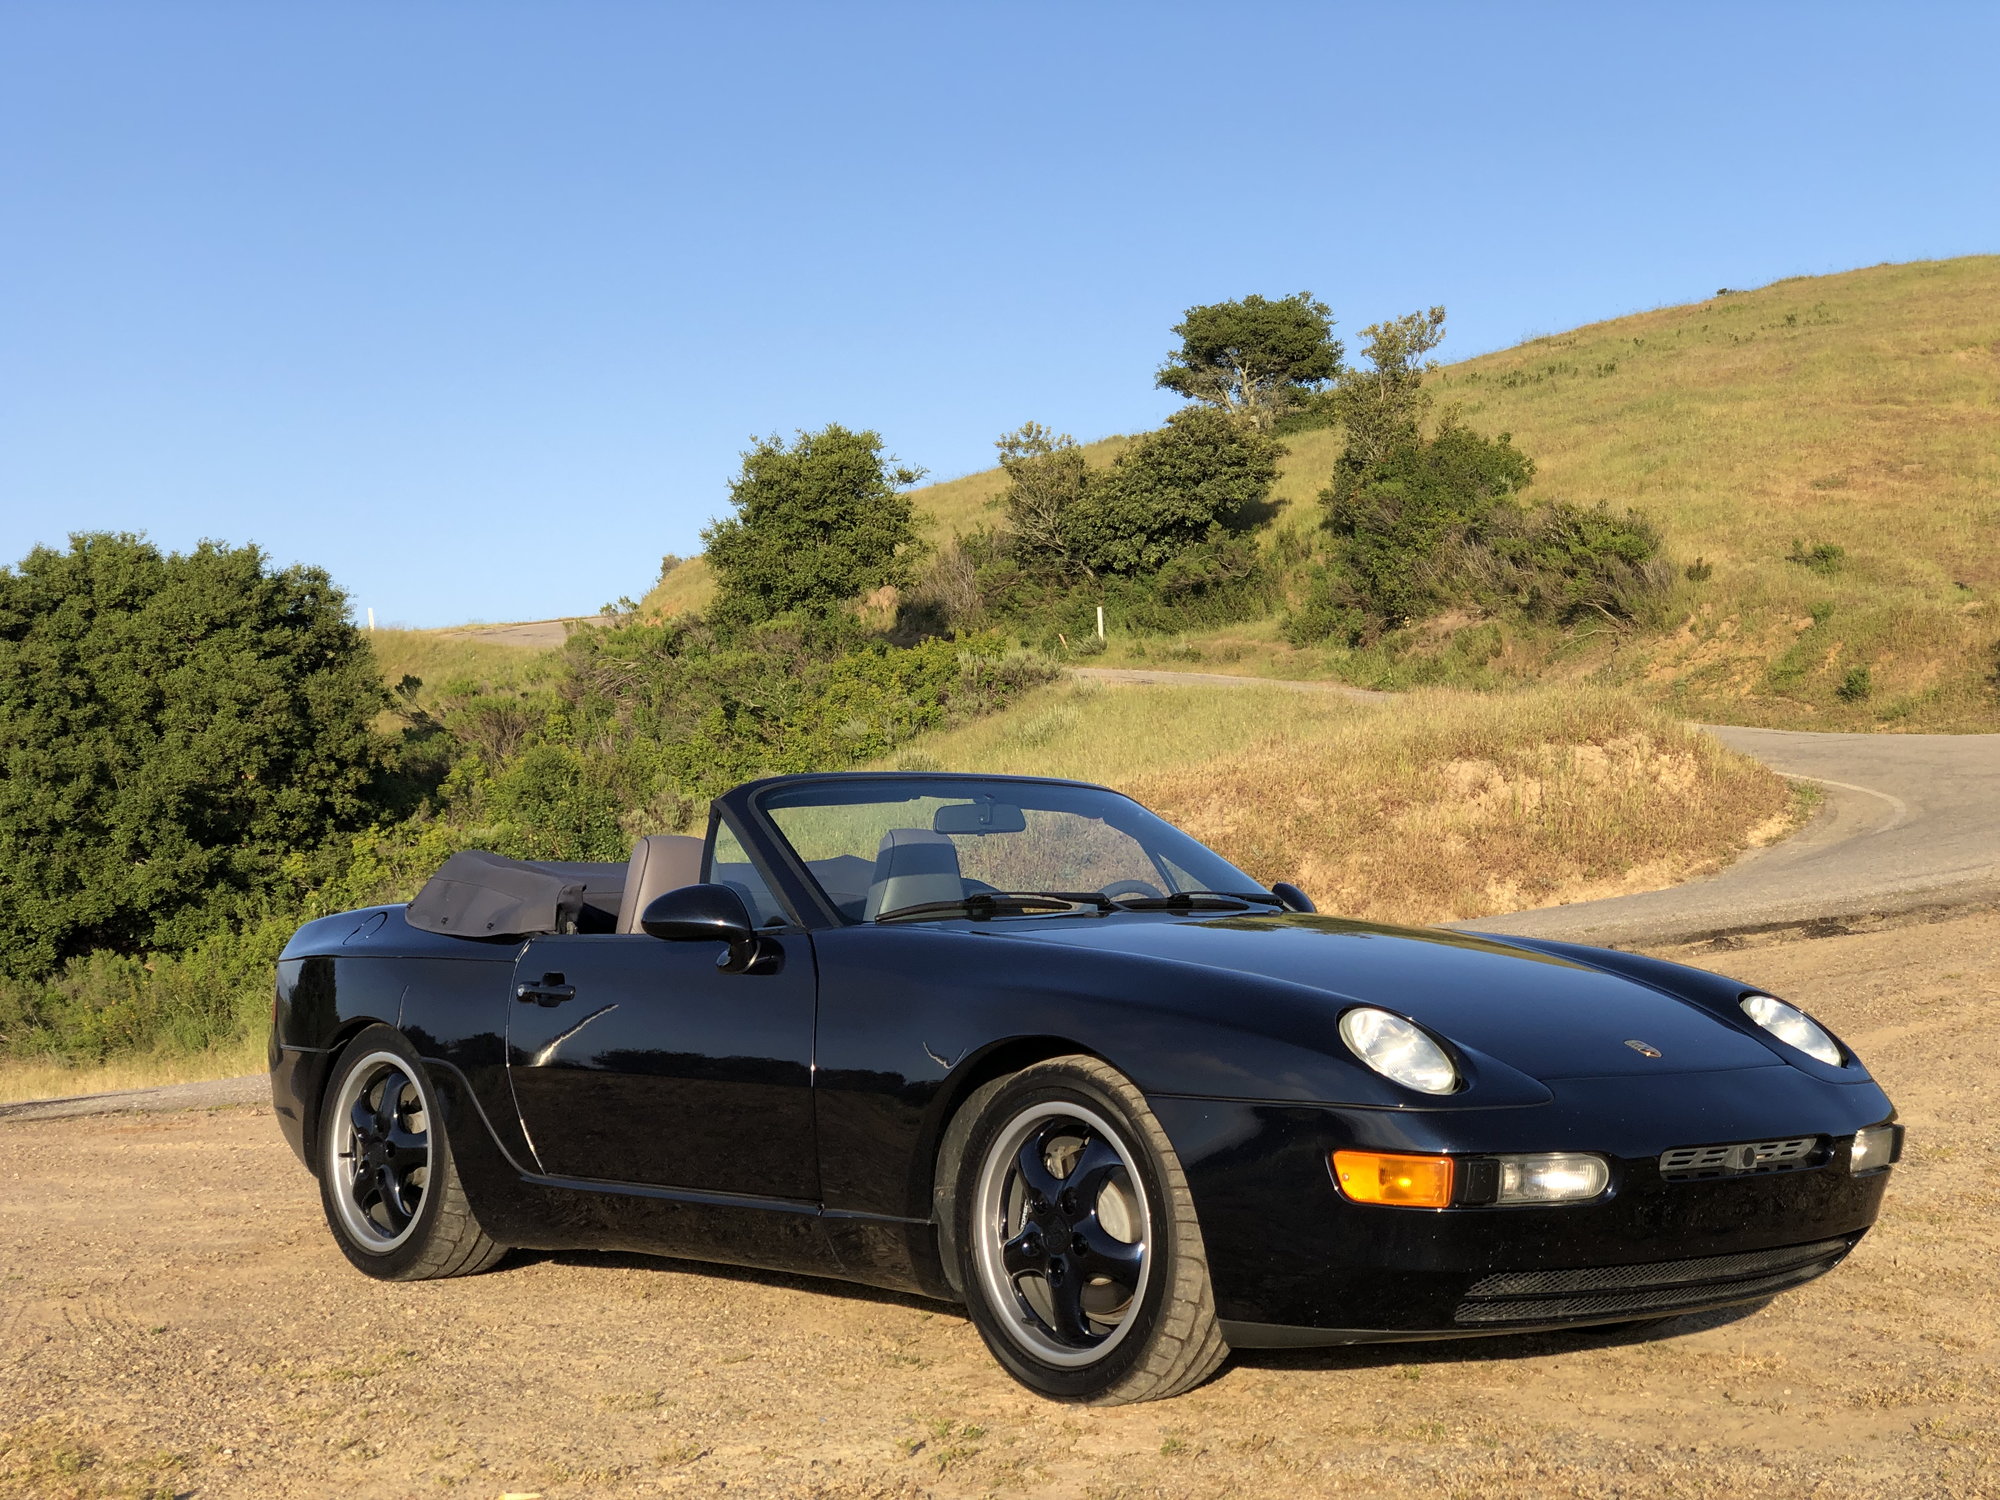 1992 Porsche 968 - 1992 Porsche 968 Cabriolet - Used - VIN WP0CA2962NS840371 - 98,400 Miles - 4 cyl - 2WD - Manual - Convertible - Blue - Pismo Beach, CA 93449, United States